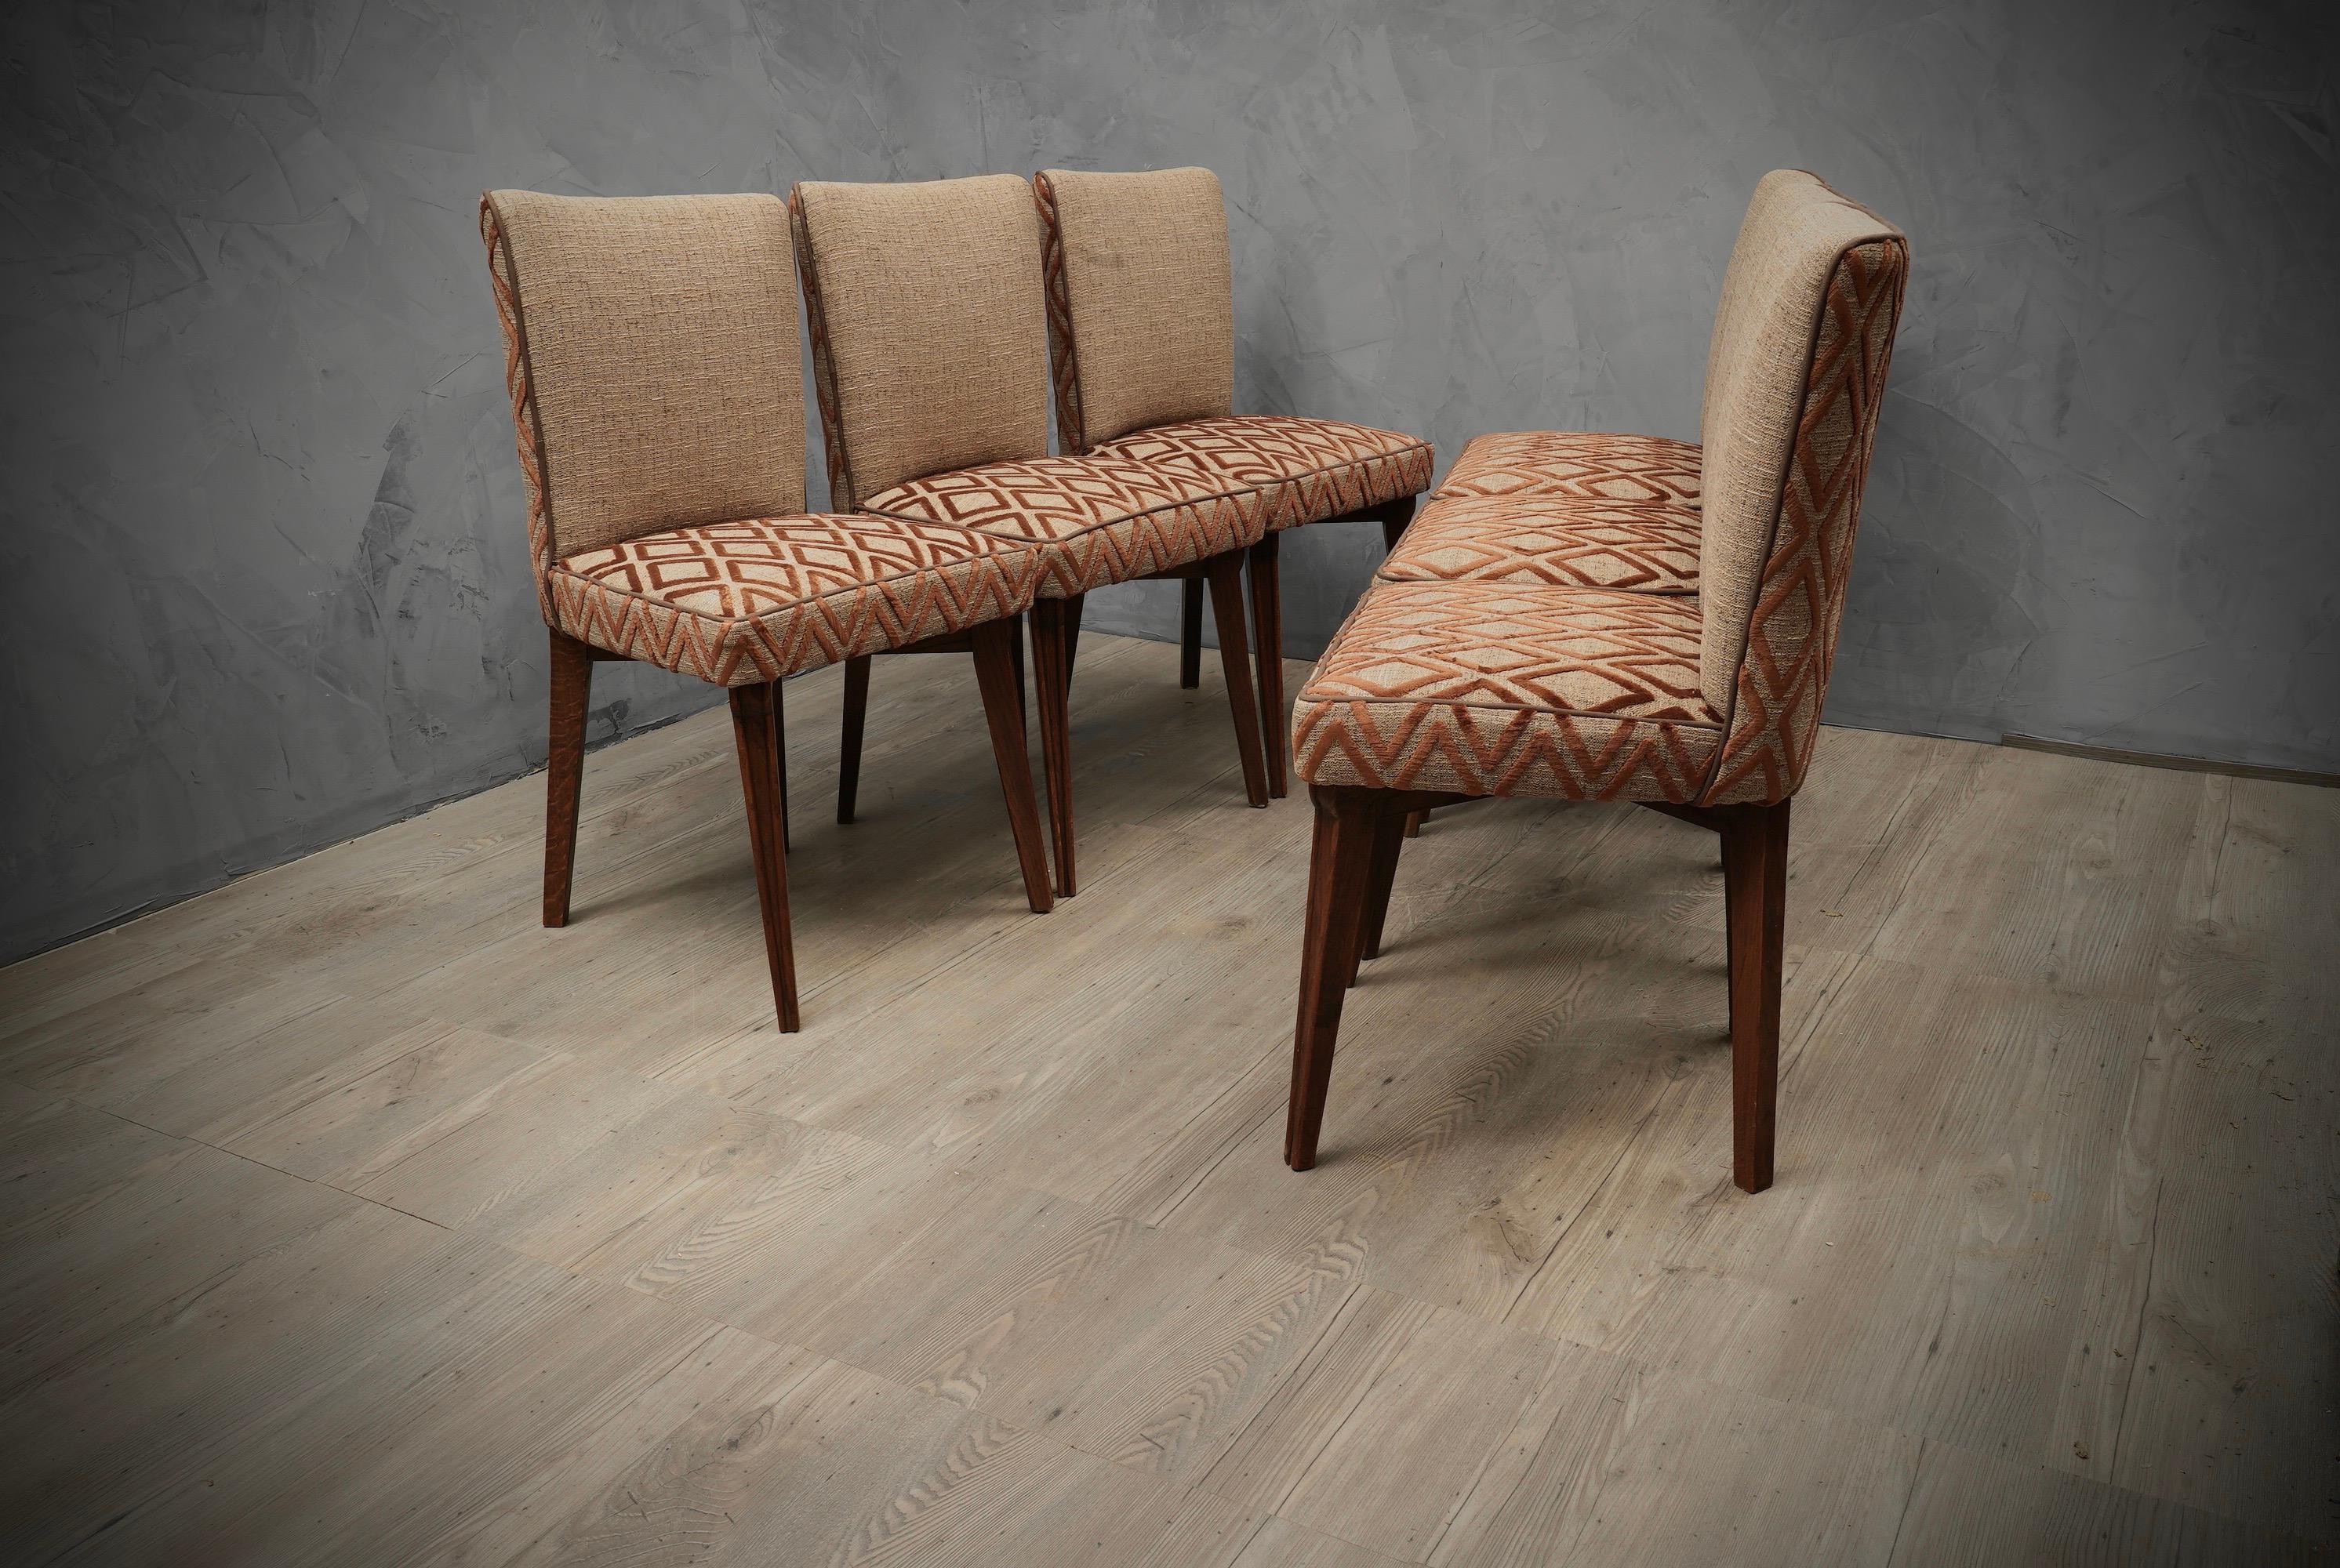 Pierluigi Colli Ash Wood and Brown Fabric Italian Dinning Room Chairs, 1950 For Sale 4